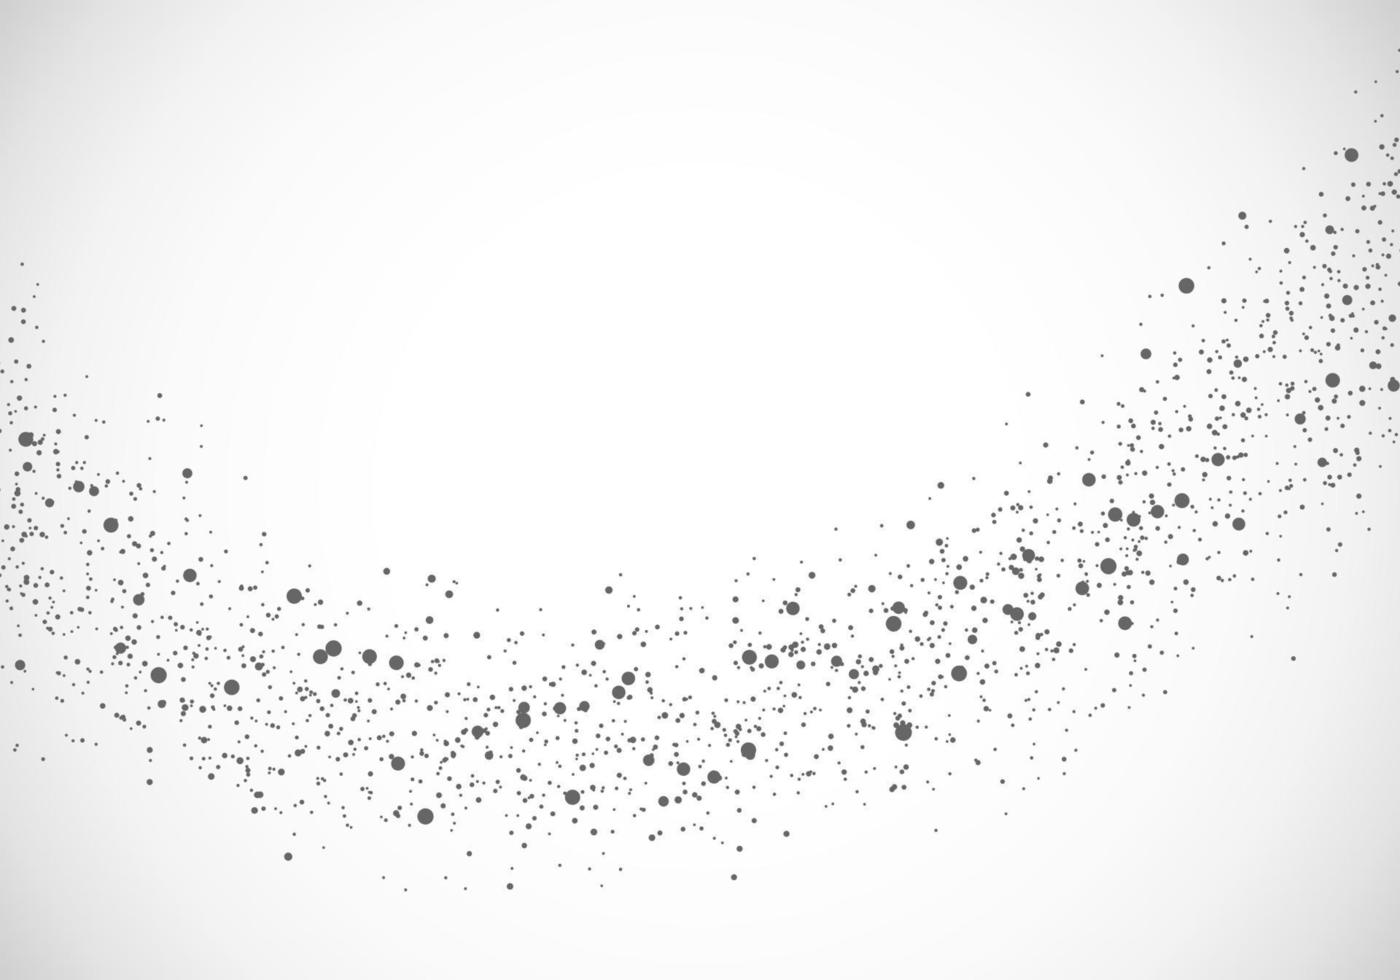 Abstract black dust dotted sparse particles design elements isolated on white background vector